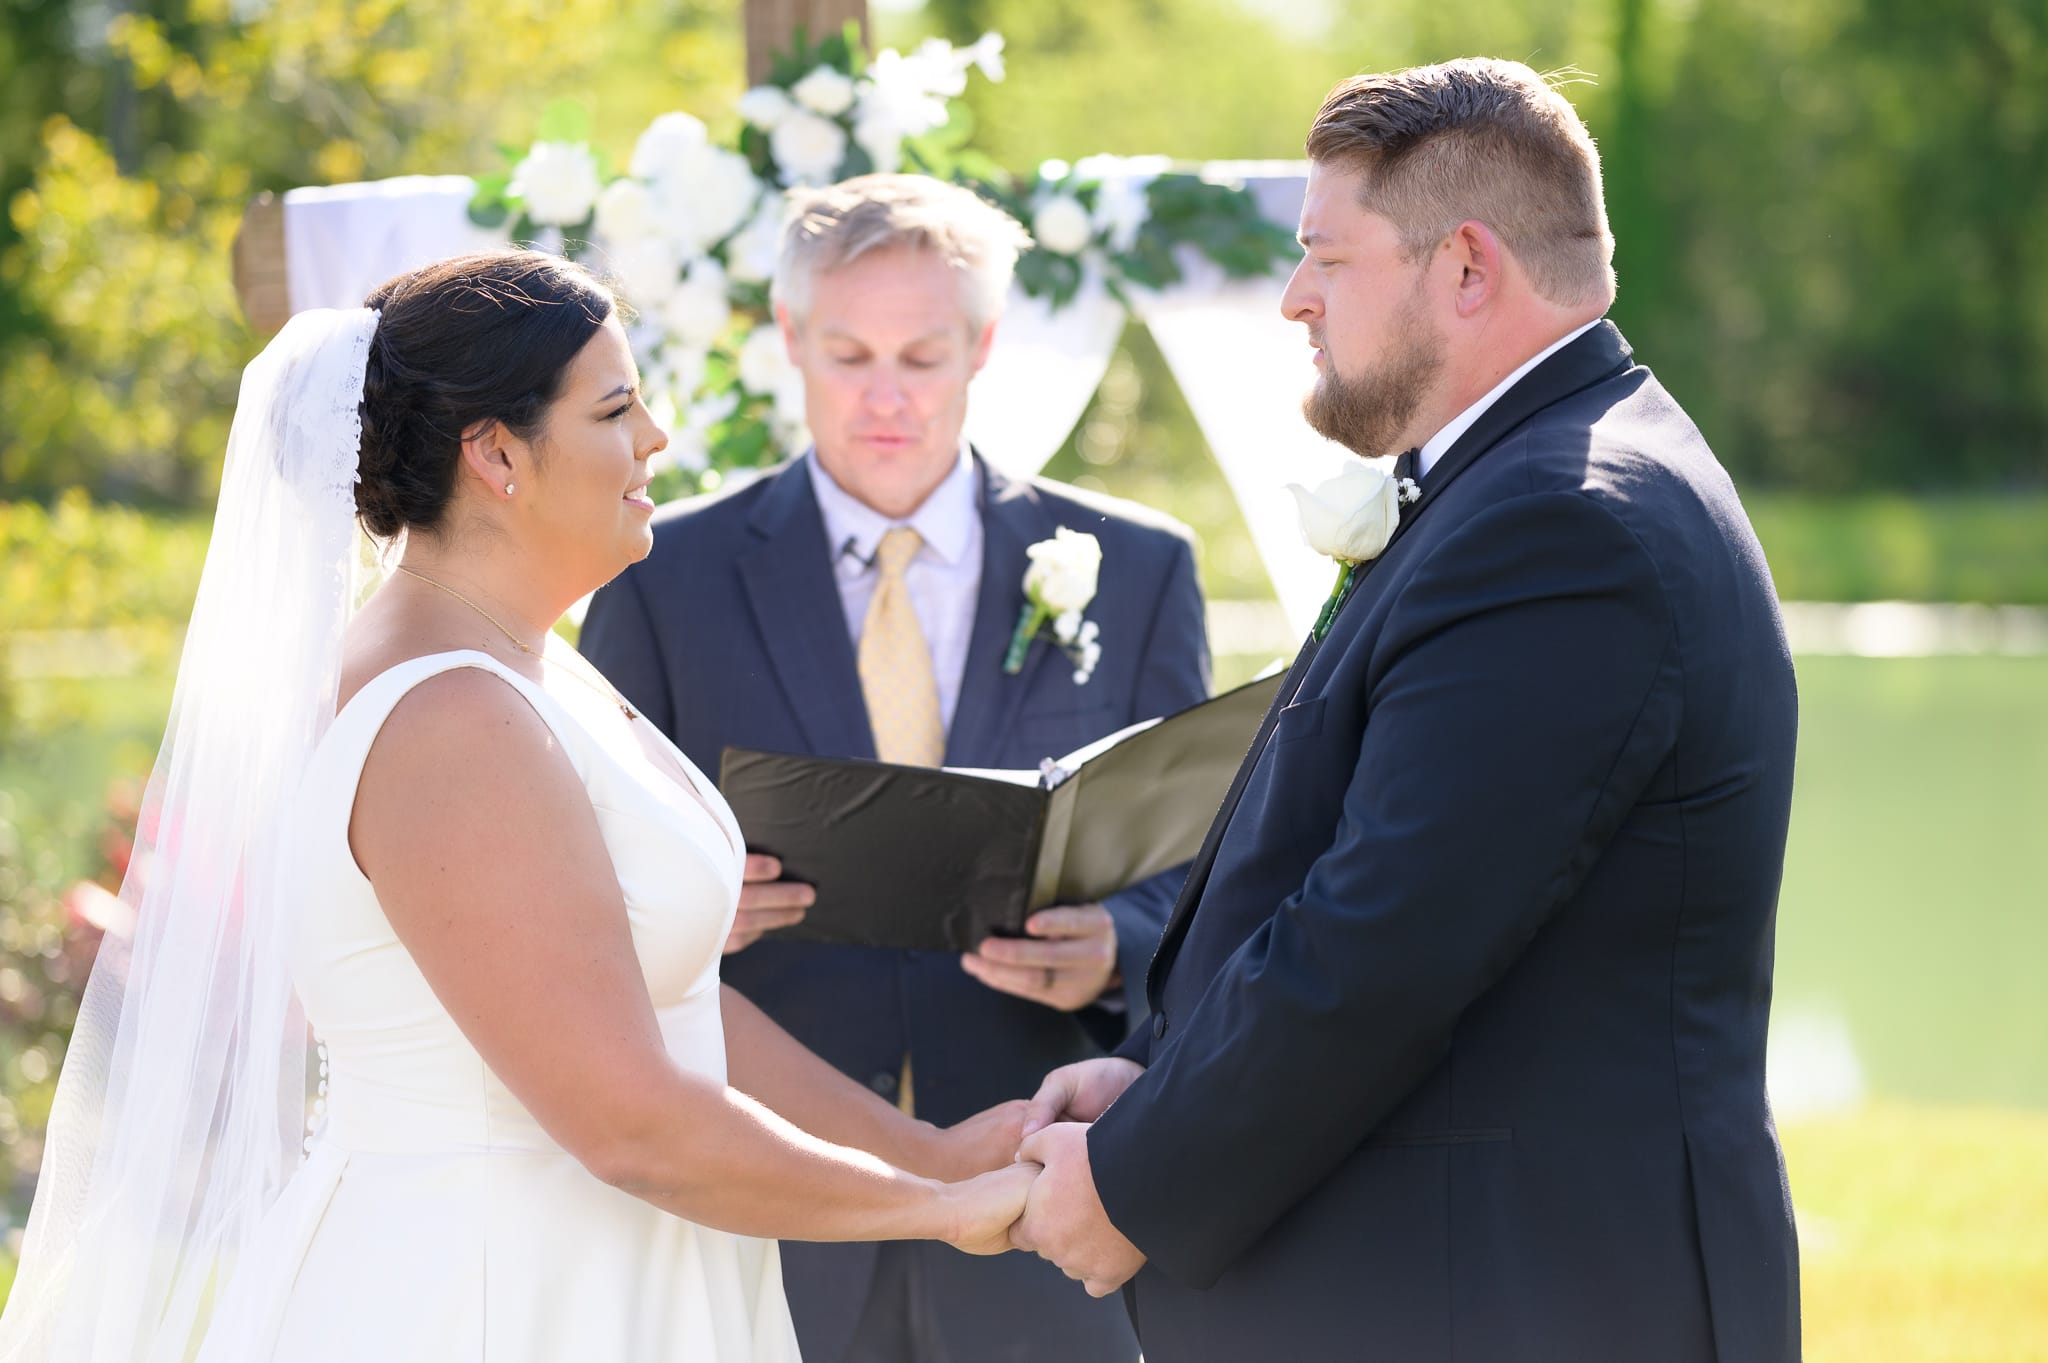 Giving vows - The Venue at White Oaks Farm